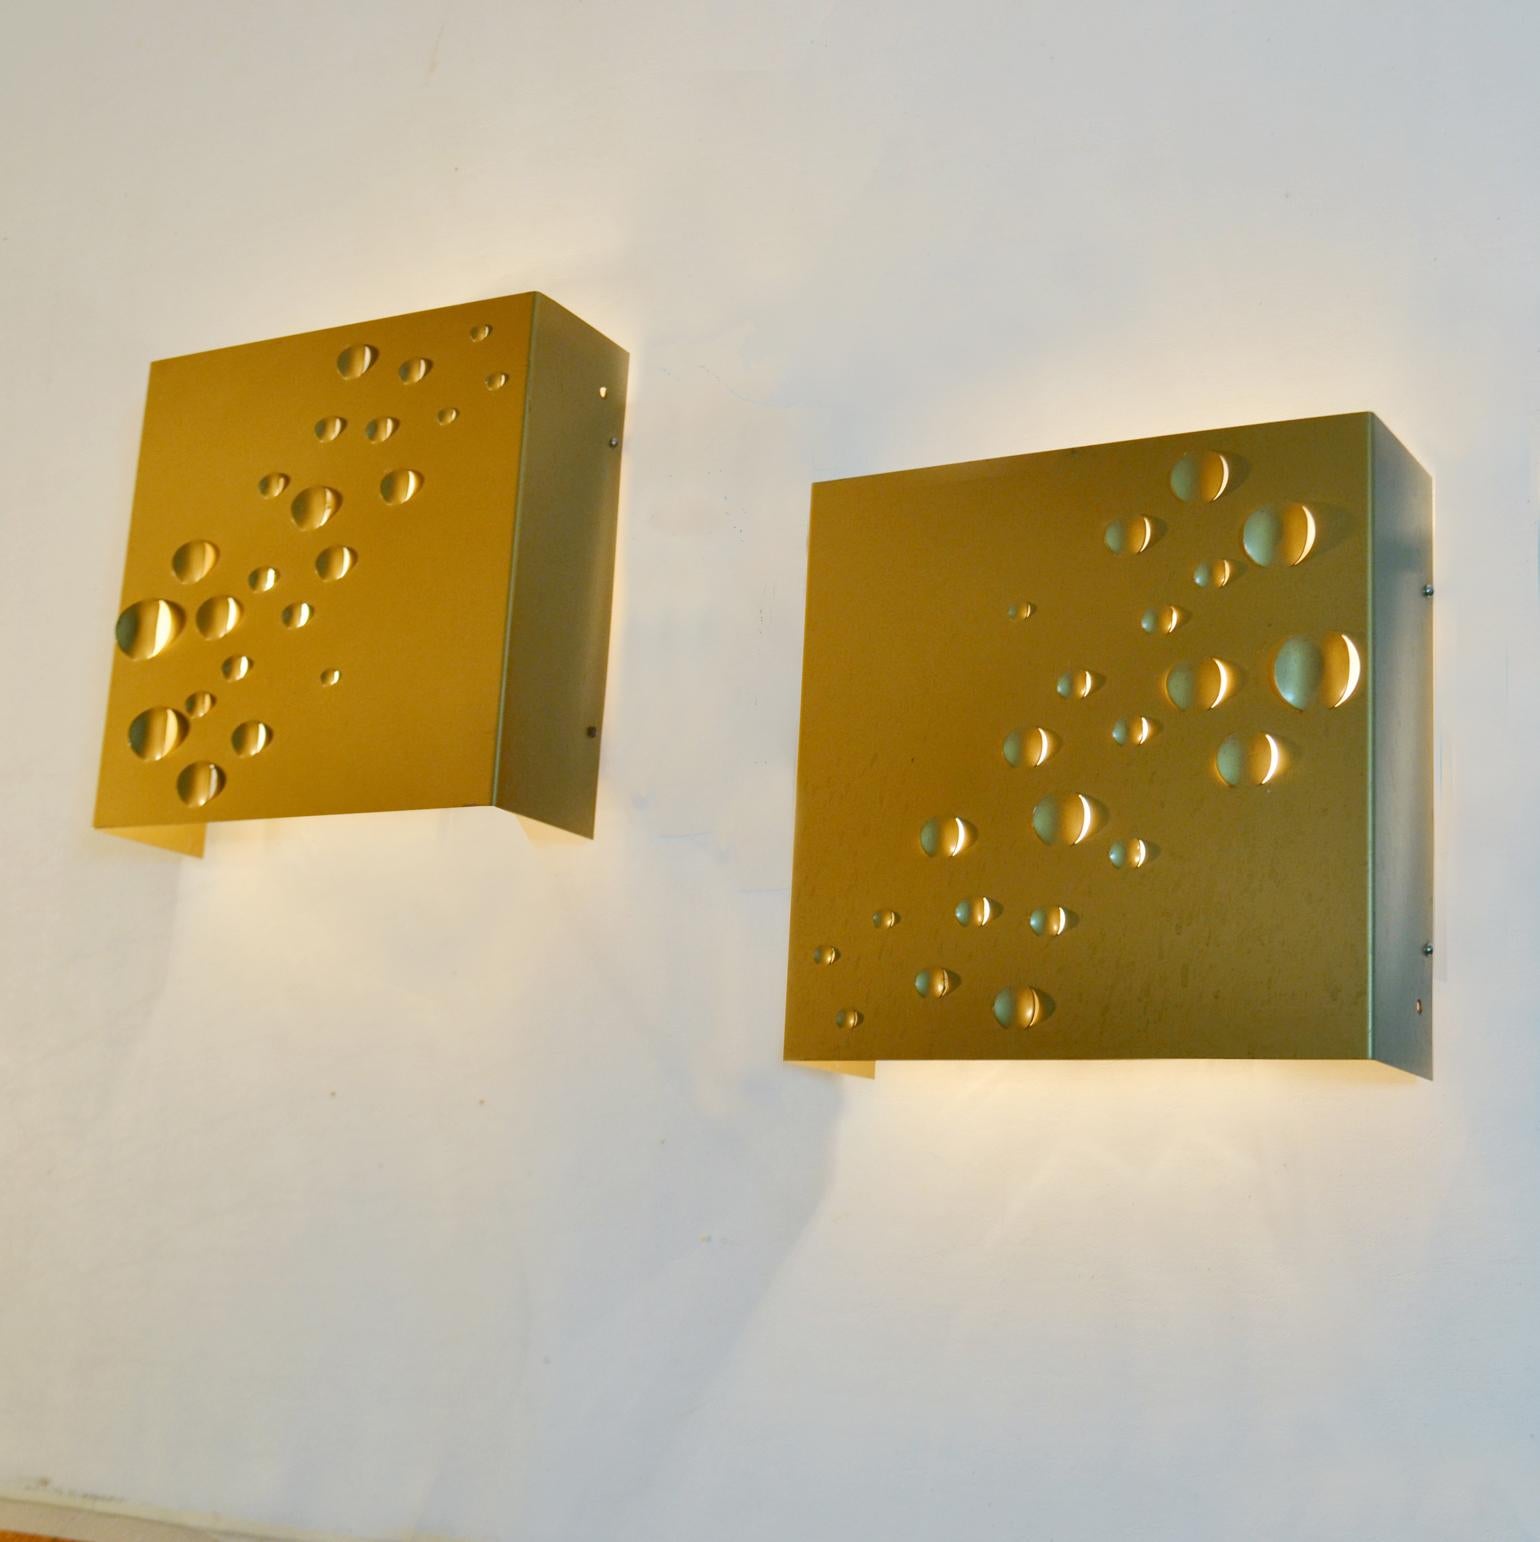 Two pairs of minimalist wall lamps in gold tinted anodized aluminum designed by Jelle Jelles produced by Raak: model number C.1627.
Jelles was a leading architect of the Dutch late Functionalist tradition in the period between 1965-1985. During